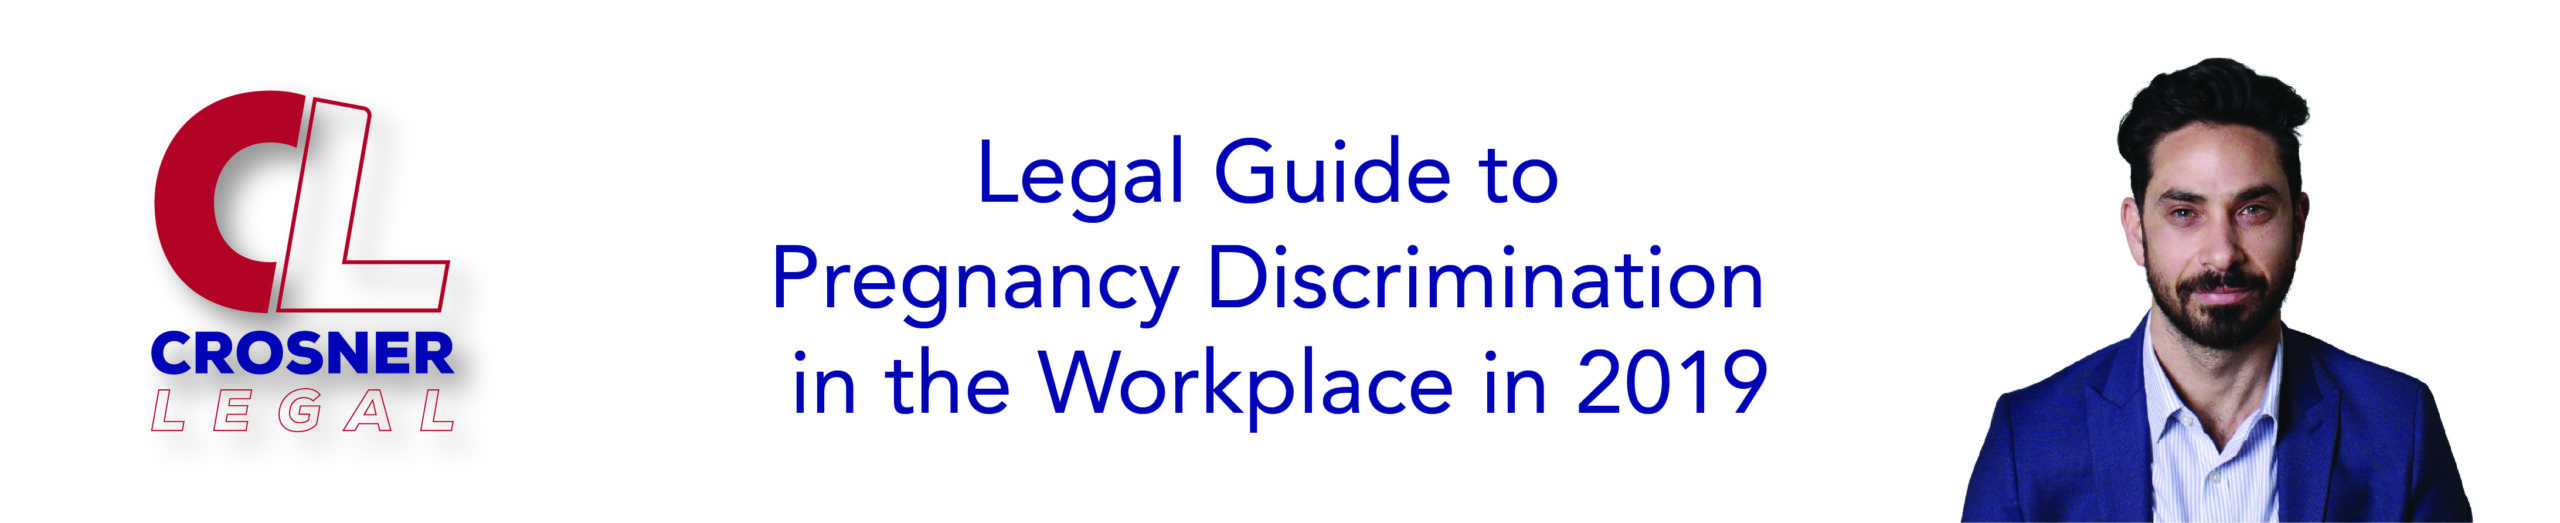 Legal Guide to Pregnancy Discrimination in the Workplace in 2019